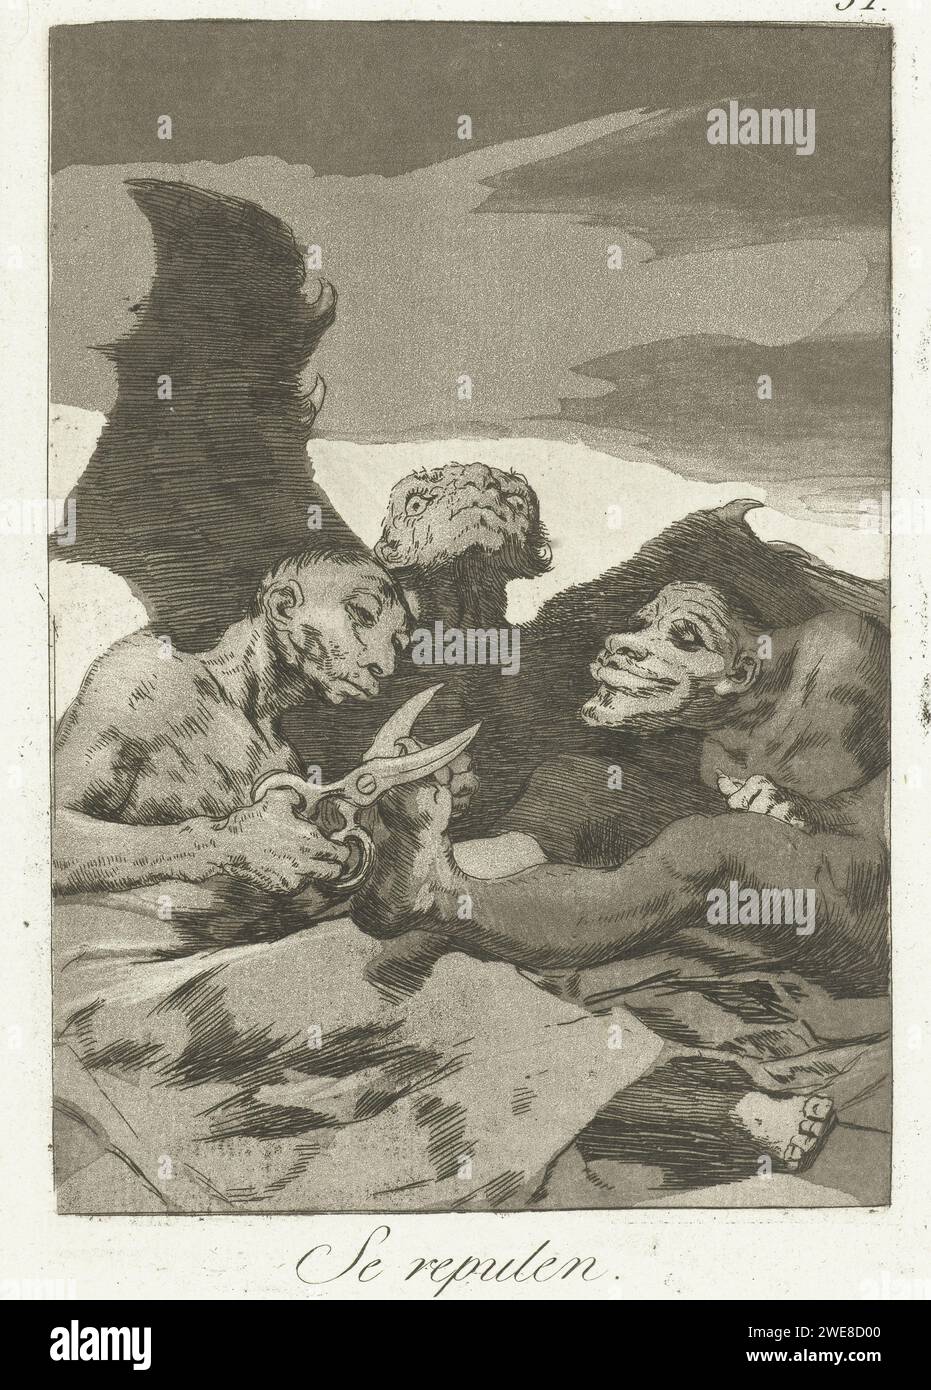 They are recovering, Francisco de Goya, 1797 - 1799 print Three diabolical figures. One cuts the toenail of another with a large scissor. A fifty fist from the Los Caprichos series. Spain paper etching devil(s) and demons. nails (toes) Stock Photo